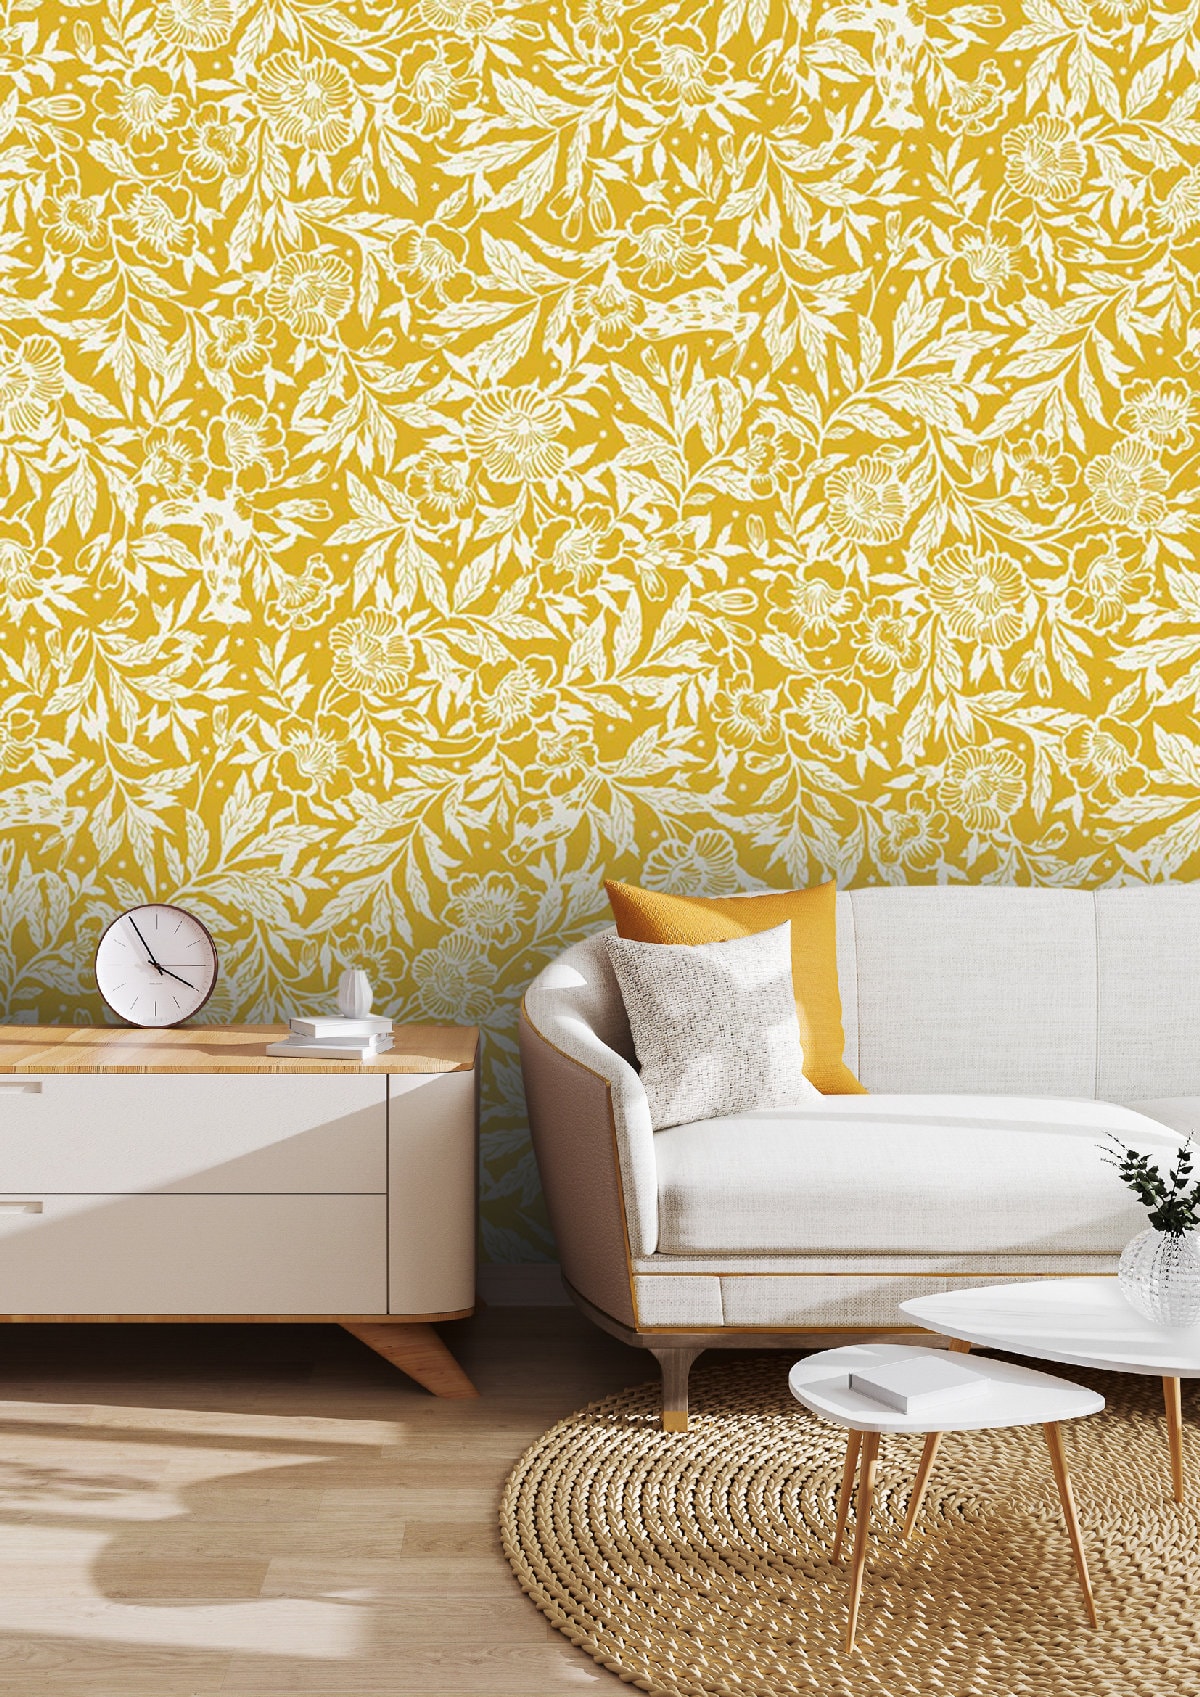 FLORAL DECOR Peel  Stick SelfAdhesive Natural Yellow Green Flower  Wallpaper Wall Stickers for Home Decor Living Room Bedroom Kids Room  Play RoomR191 16X128 INCH 14 Square feet1 Role  Amazonin Home